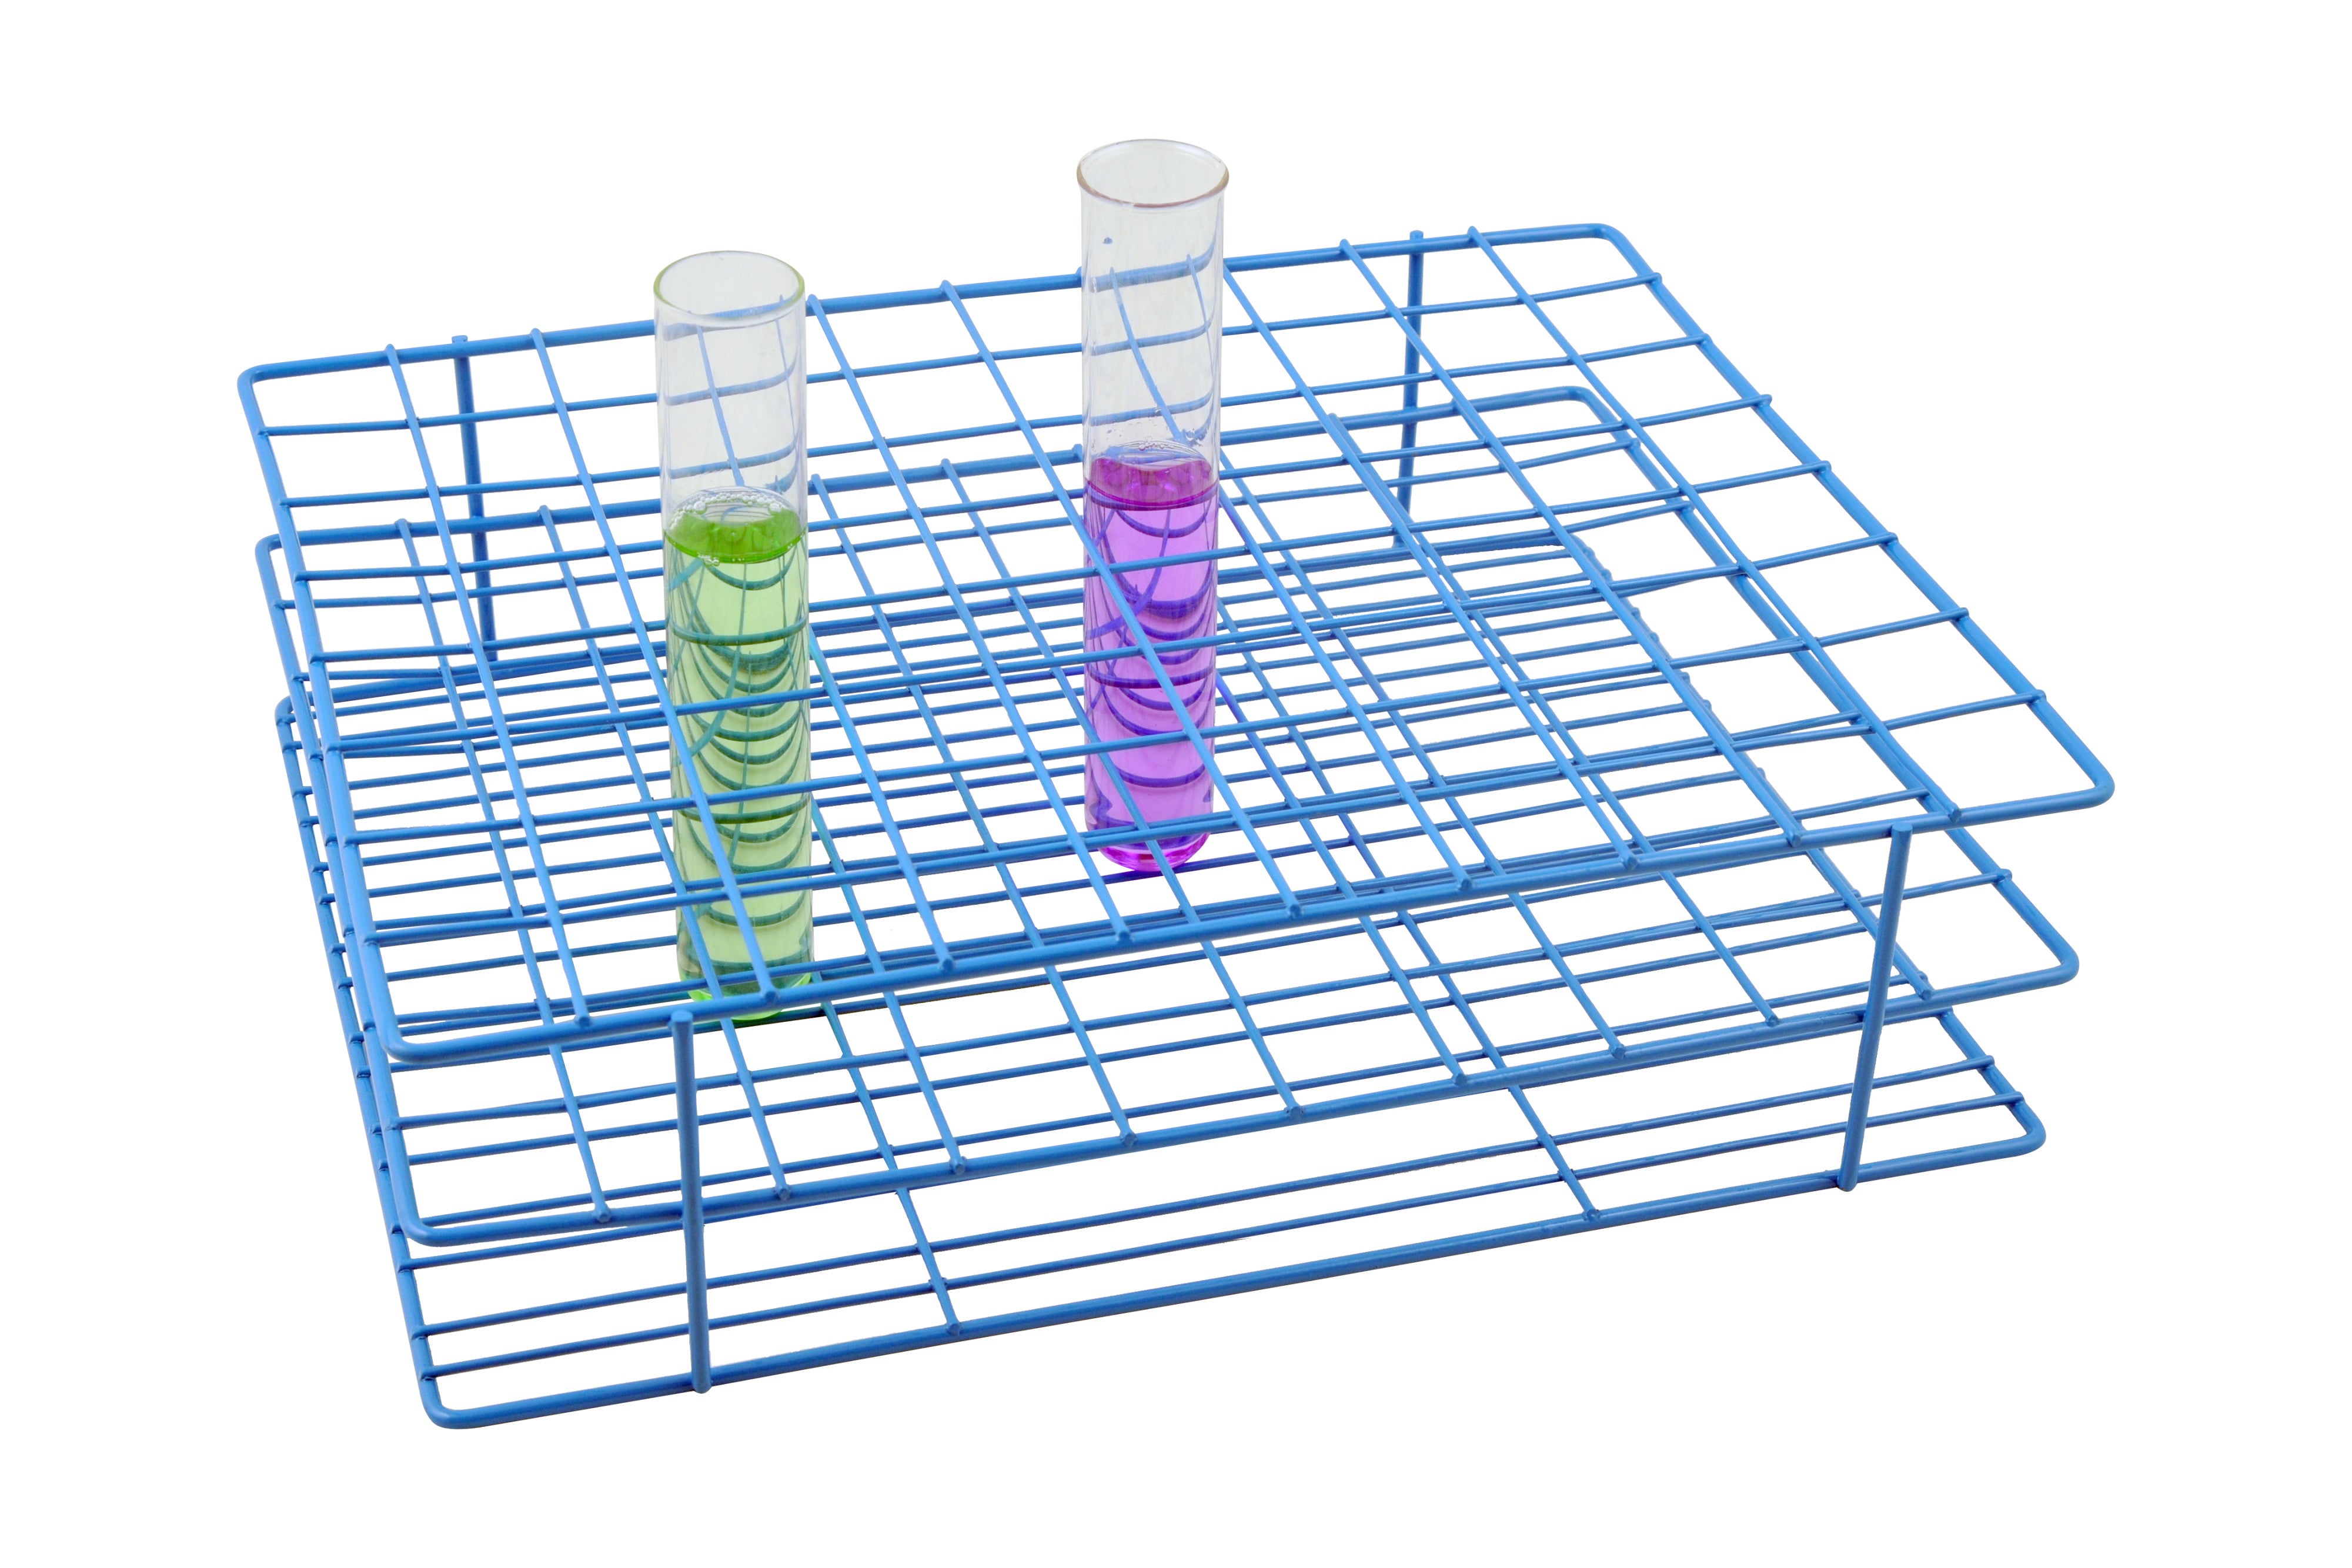 Blue Epoxy Coated Steel Wire Test Tube Rack, 80 Tubes (22-25mm), 8x10 Format